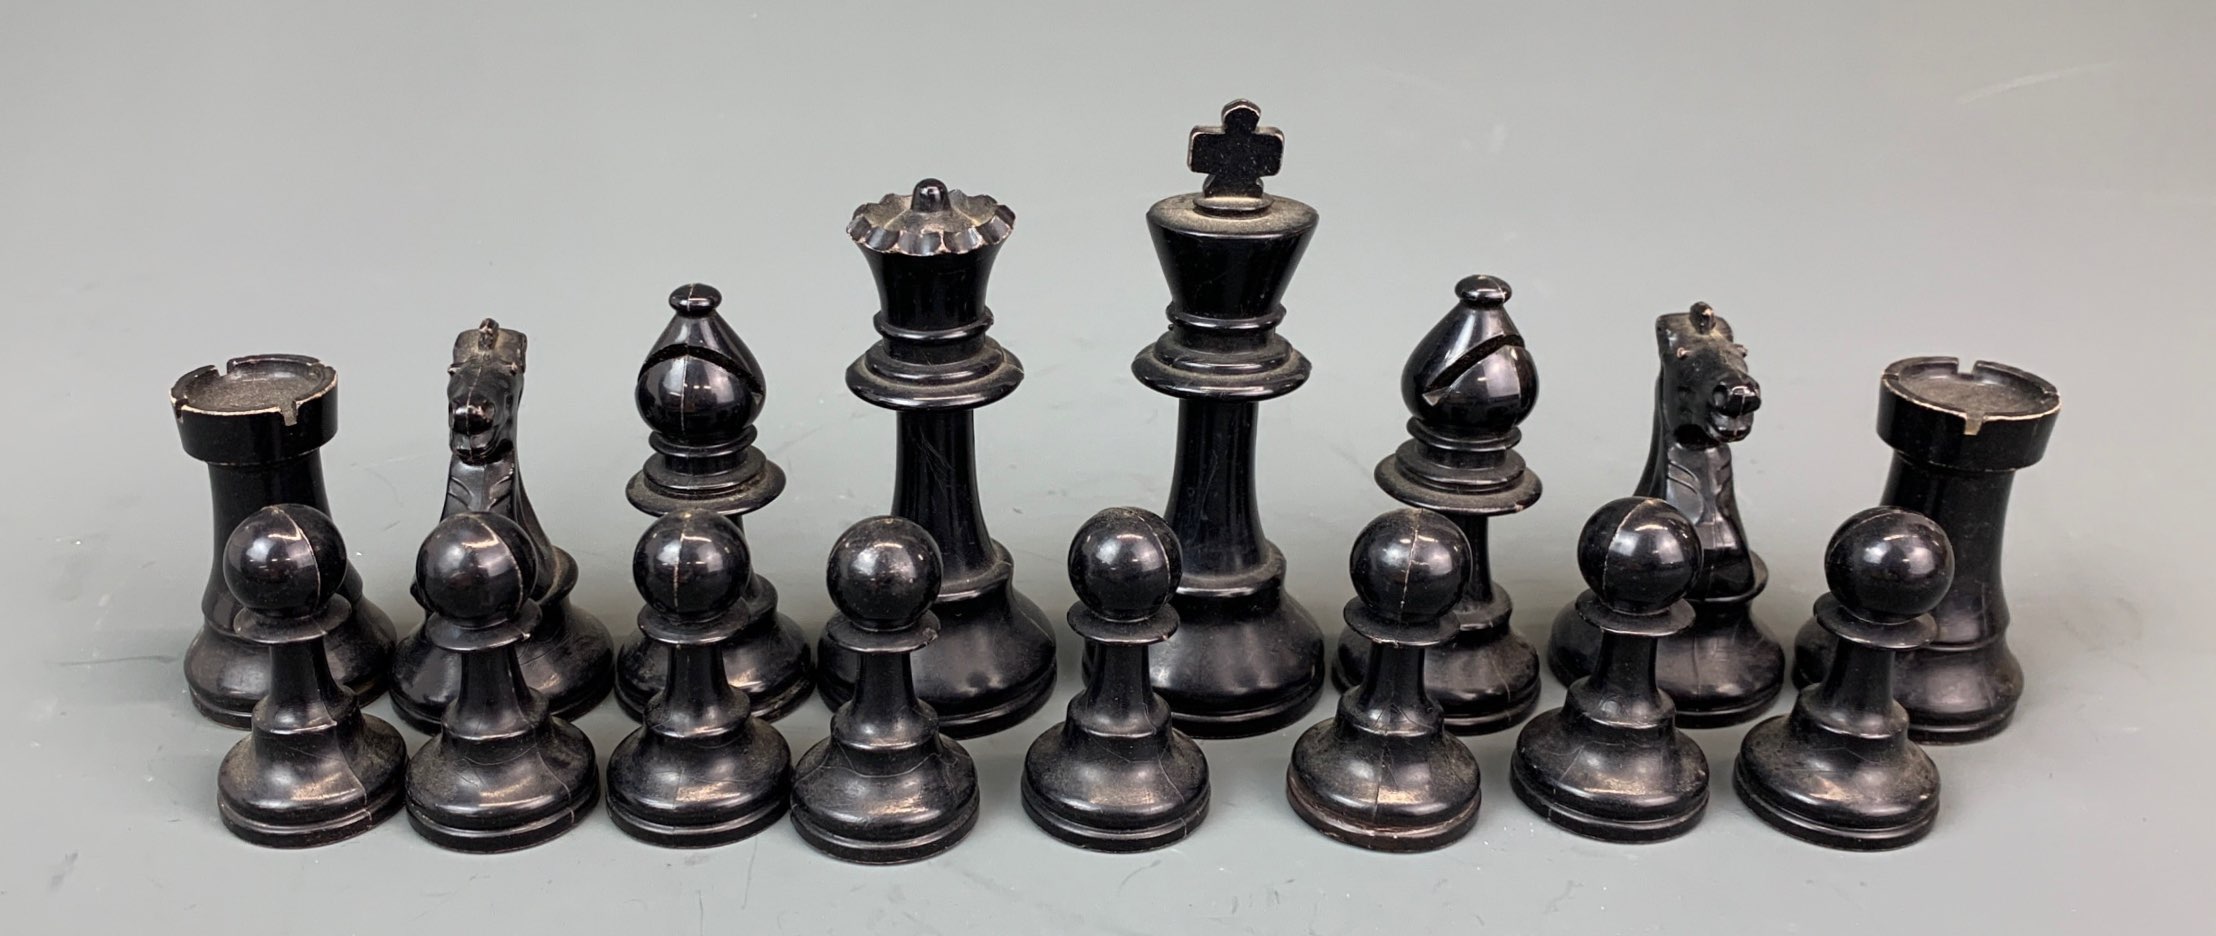 A vintage celluloid chess set with wooden board, king H. 9.5cm. - Image 3 of 6